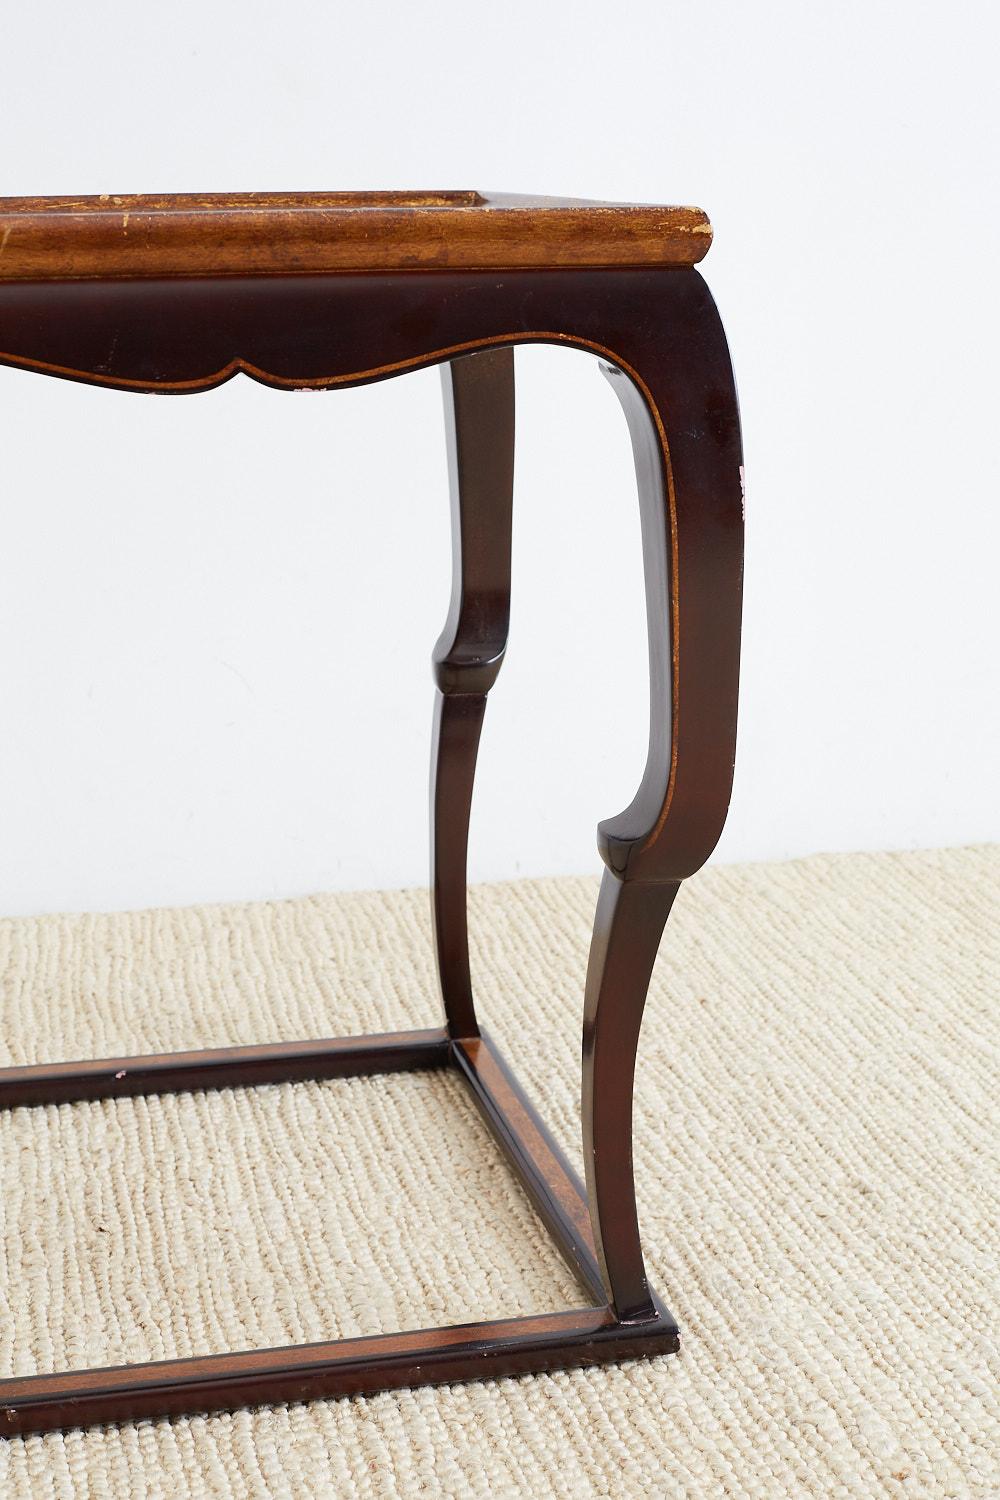 English Mahogany Lacquered Side Table or Drinks Table 1